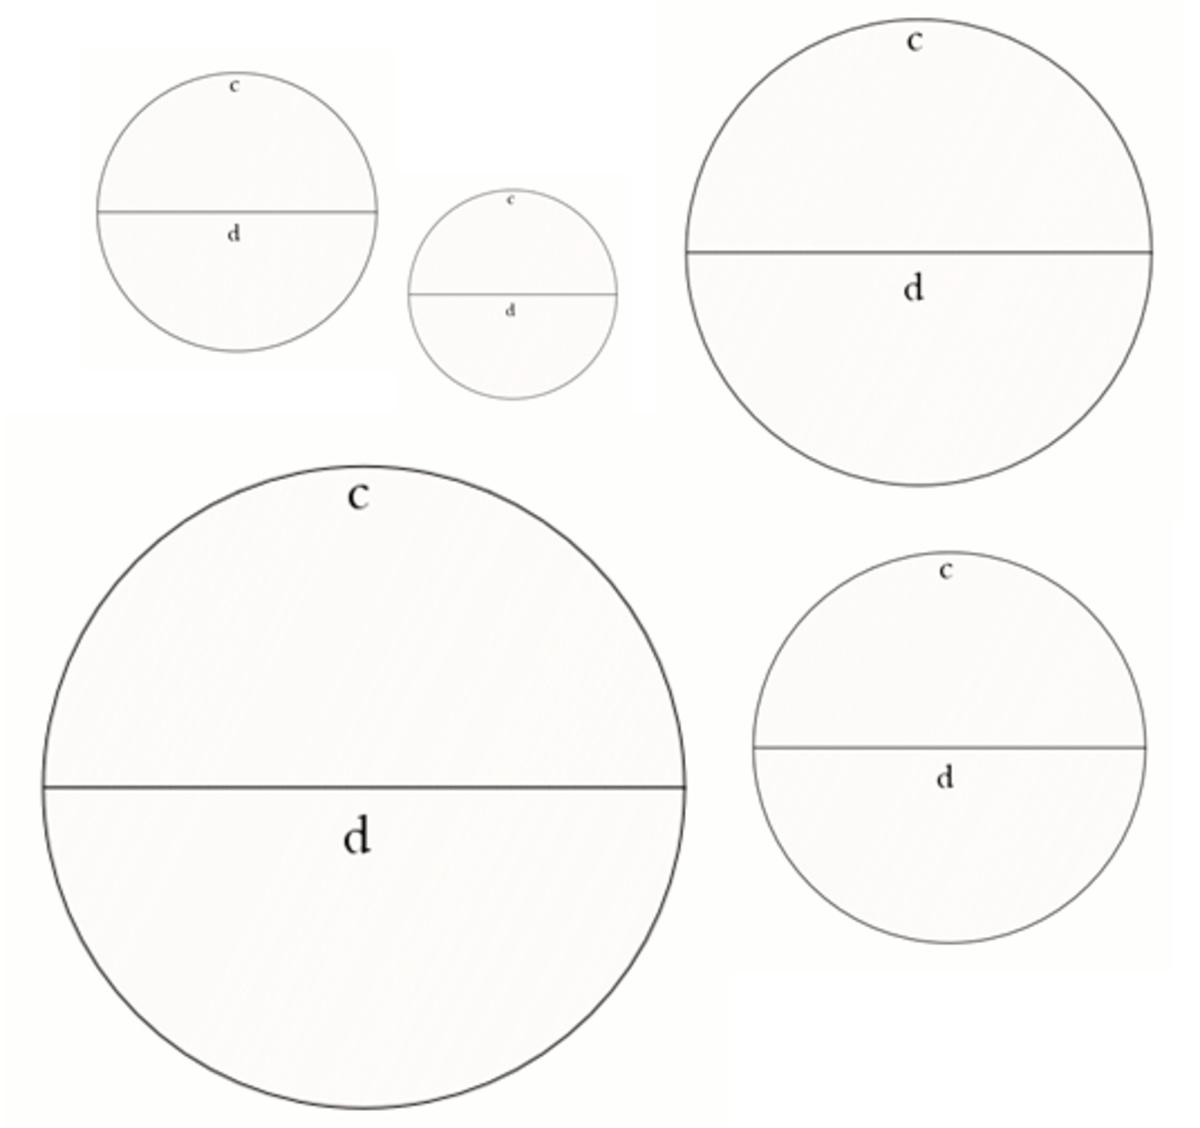 Teaching Circumference and Diameter of a Circle